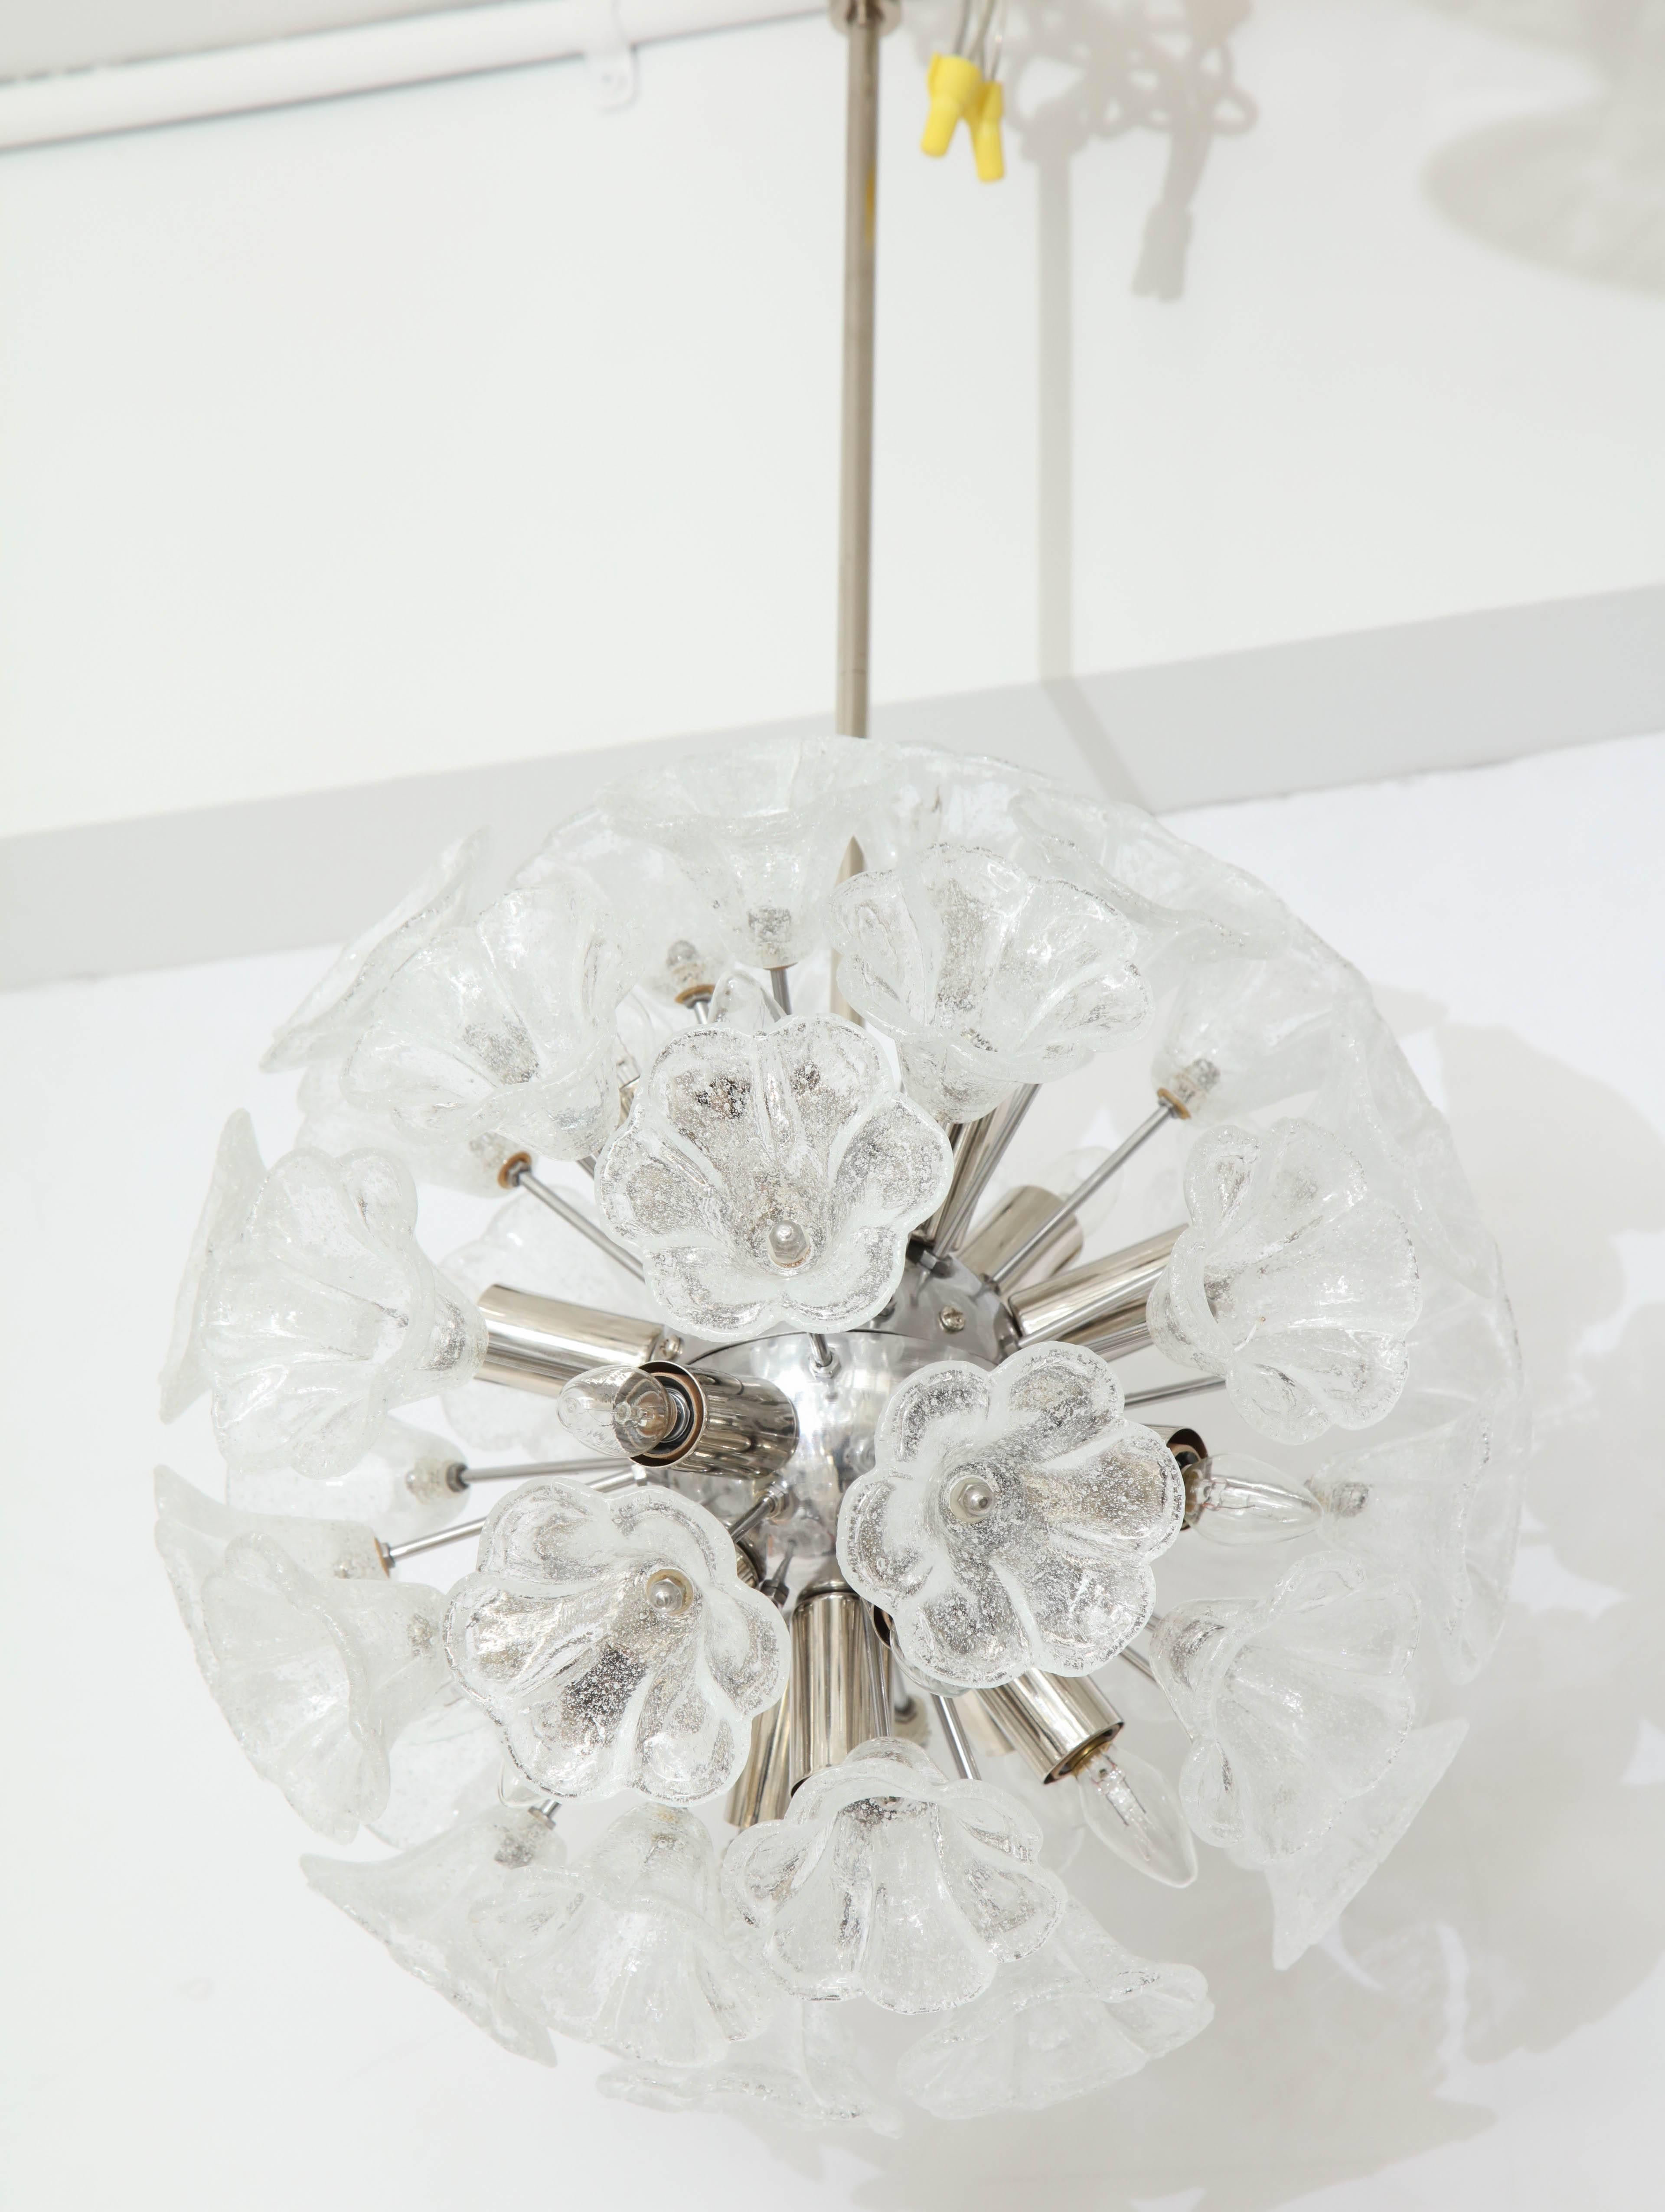 Elegant Italian floral Sputnik chandelier.
The chrome armature supports clear and opaque floral glass elements with light bulbs nestled in between.
The fixture has been newly rewired for the US with candelabra light sockets and comes complete with a